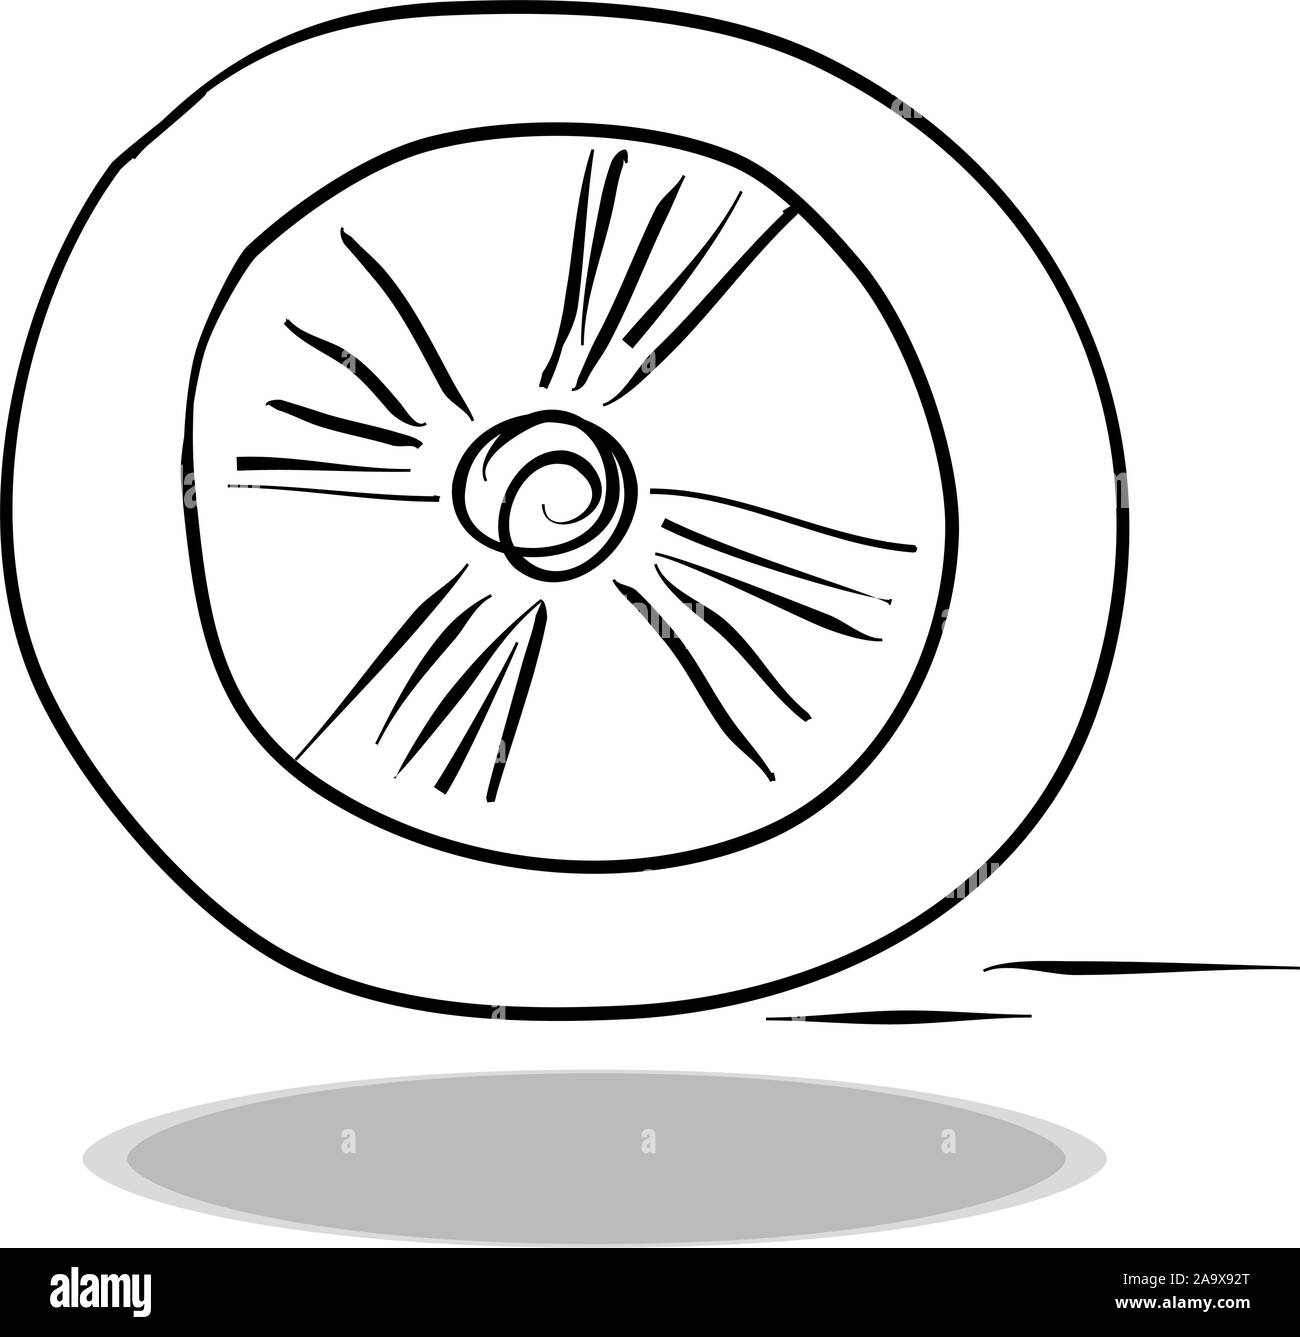 Wheel icon on white background, flat design, hand drawing. Illustration of tire, contour of symbol Stock Vector